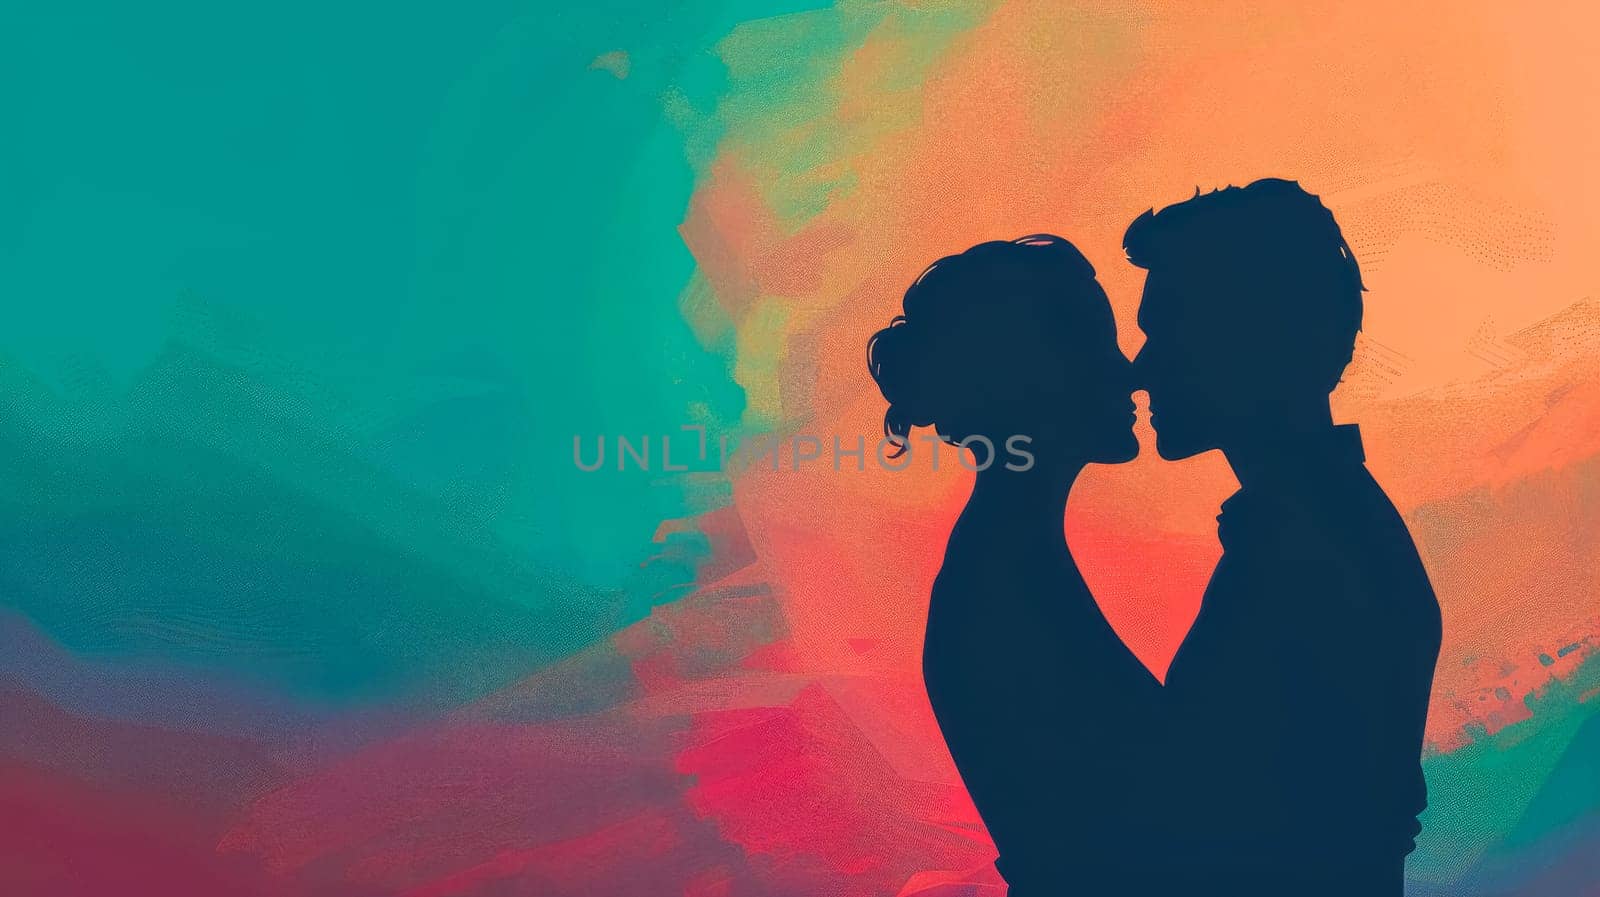 Silhouette profile view of a couple in a tender embrace with vibrant artistic backdrop